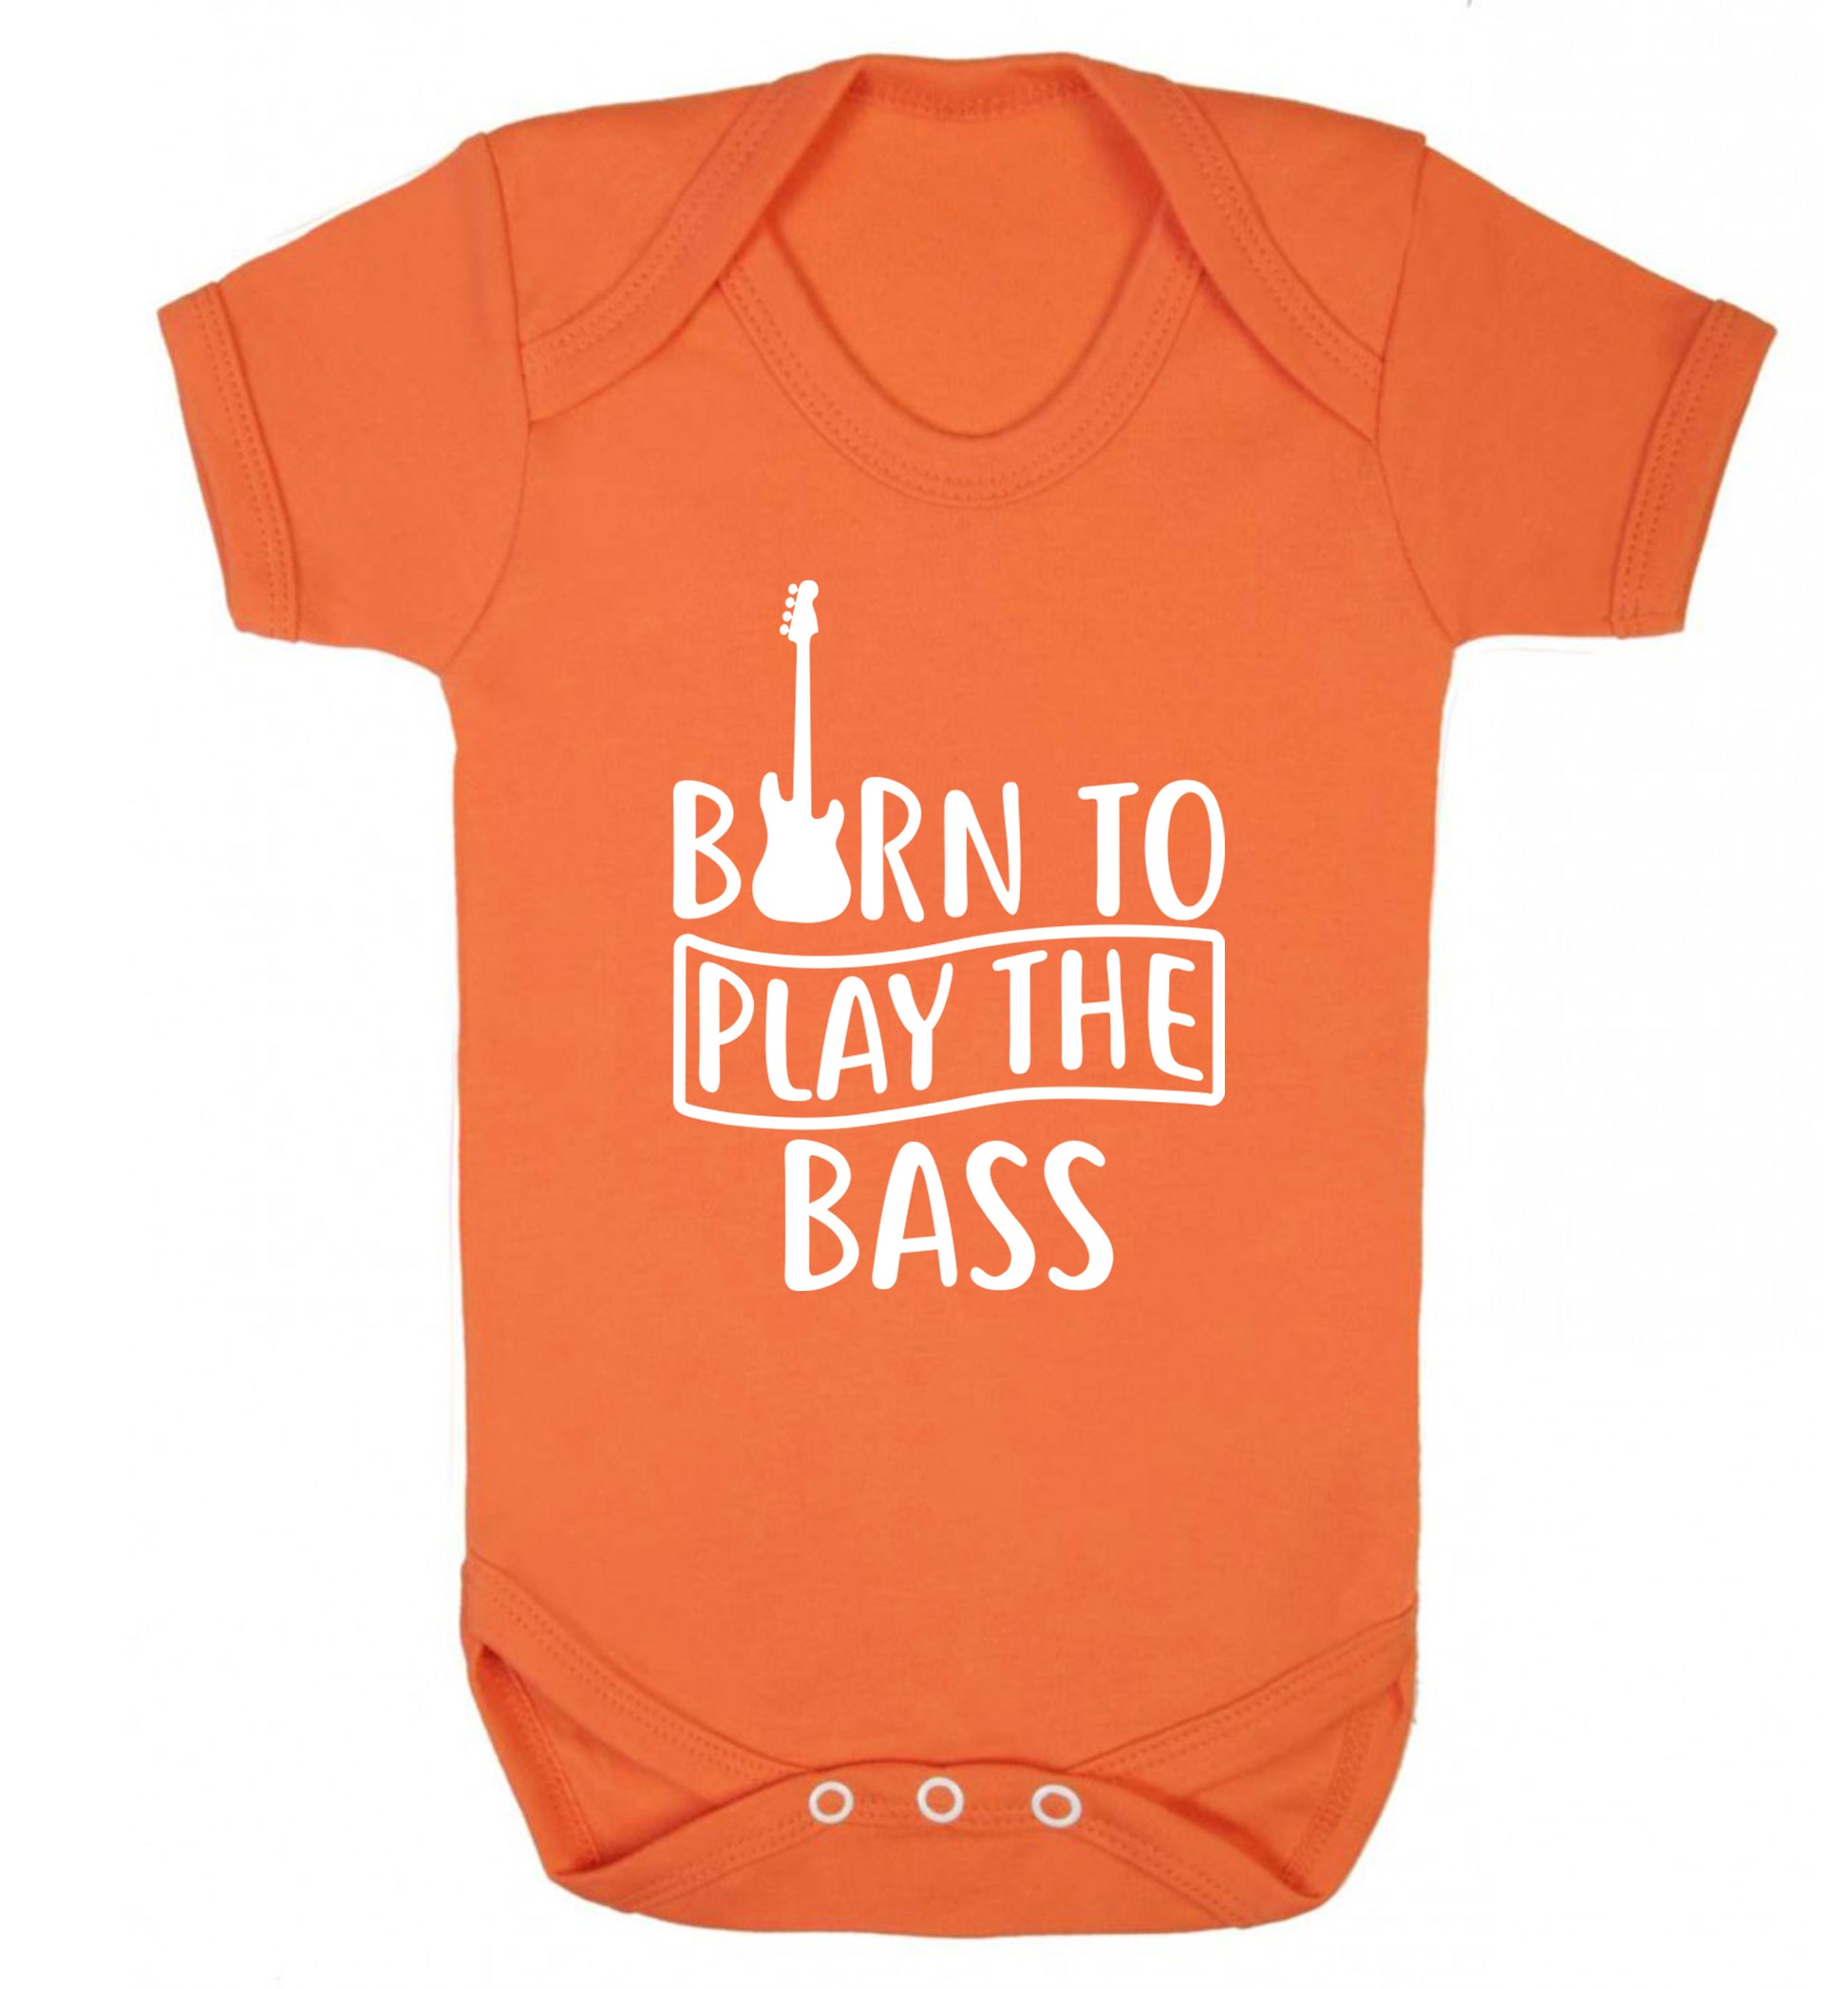 Born to play the bass Baby Vest orange 18-24 months